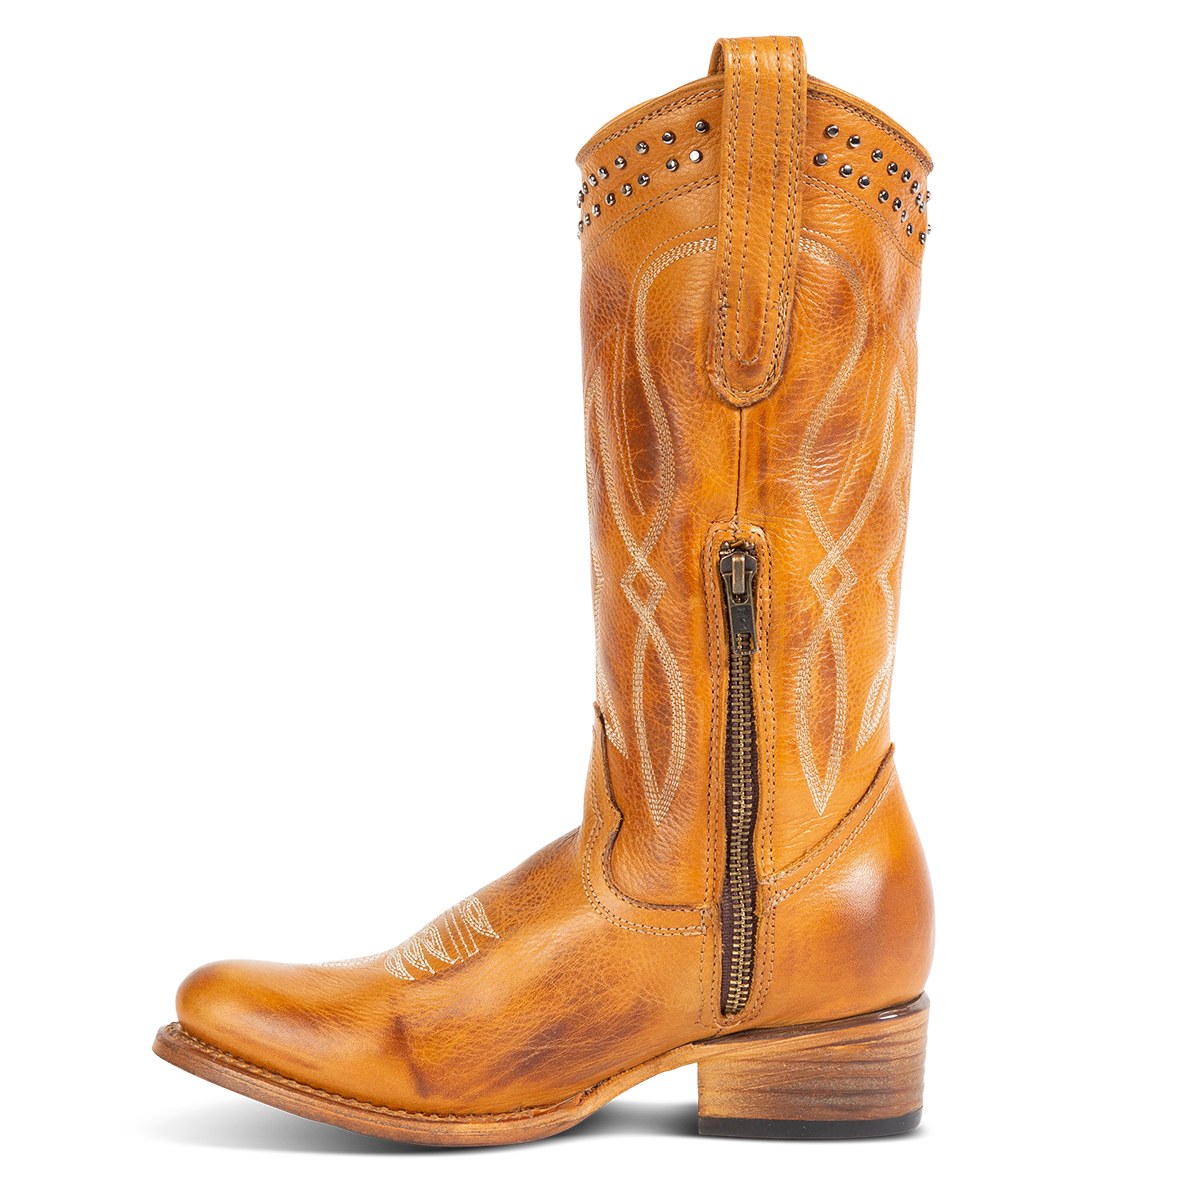 Inside view showing inside zipper and pill straps with stud and stitch detailing on FREEBIRD women's Zion wheat western mid boot